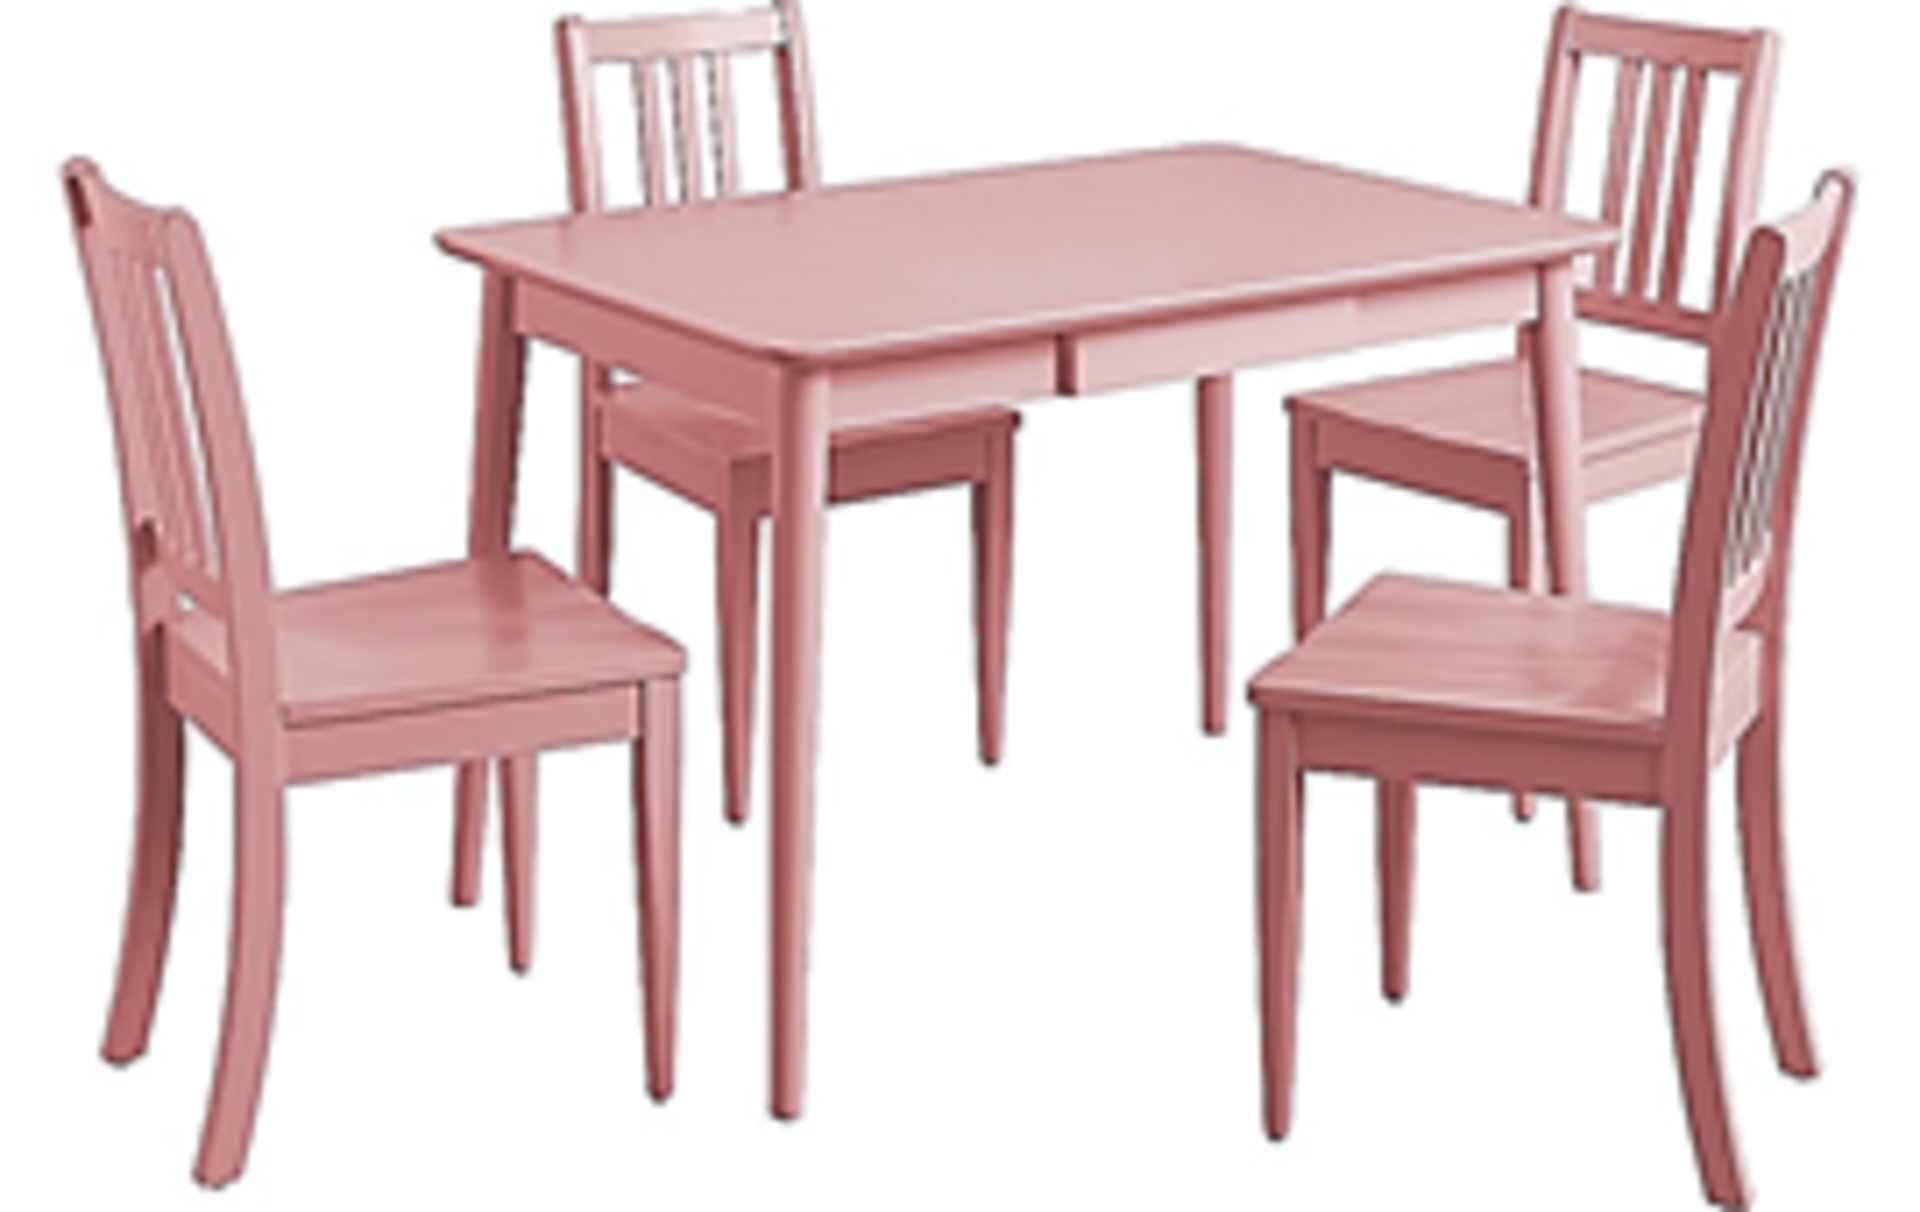 Solid Wooden Pink table with 4 Wooden pink chairs